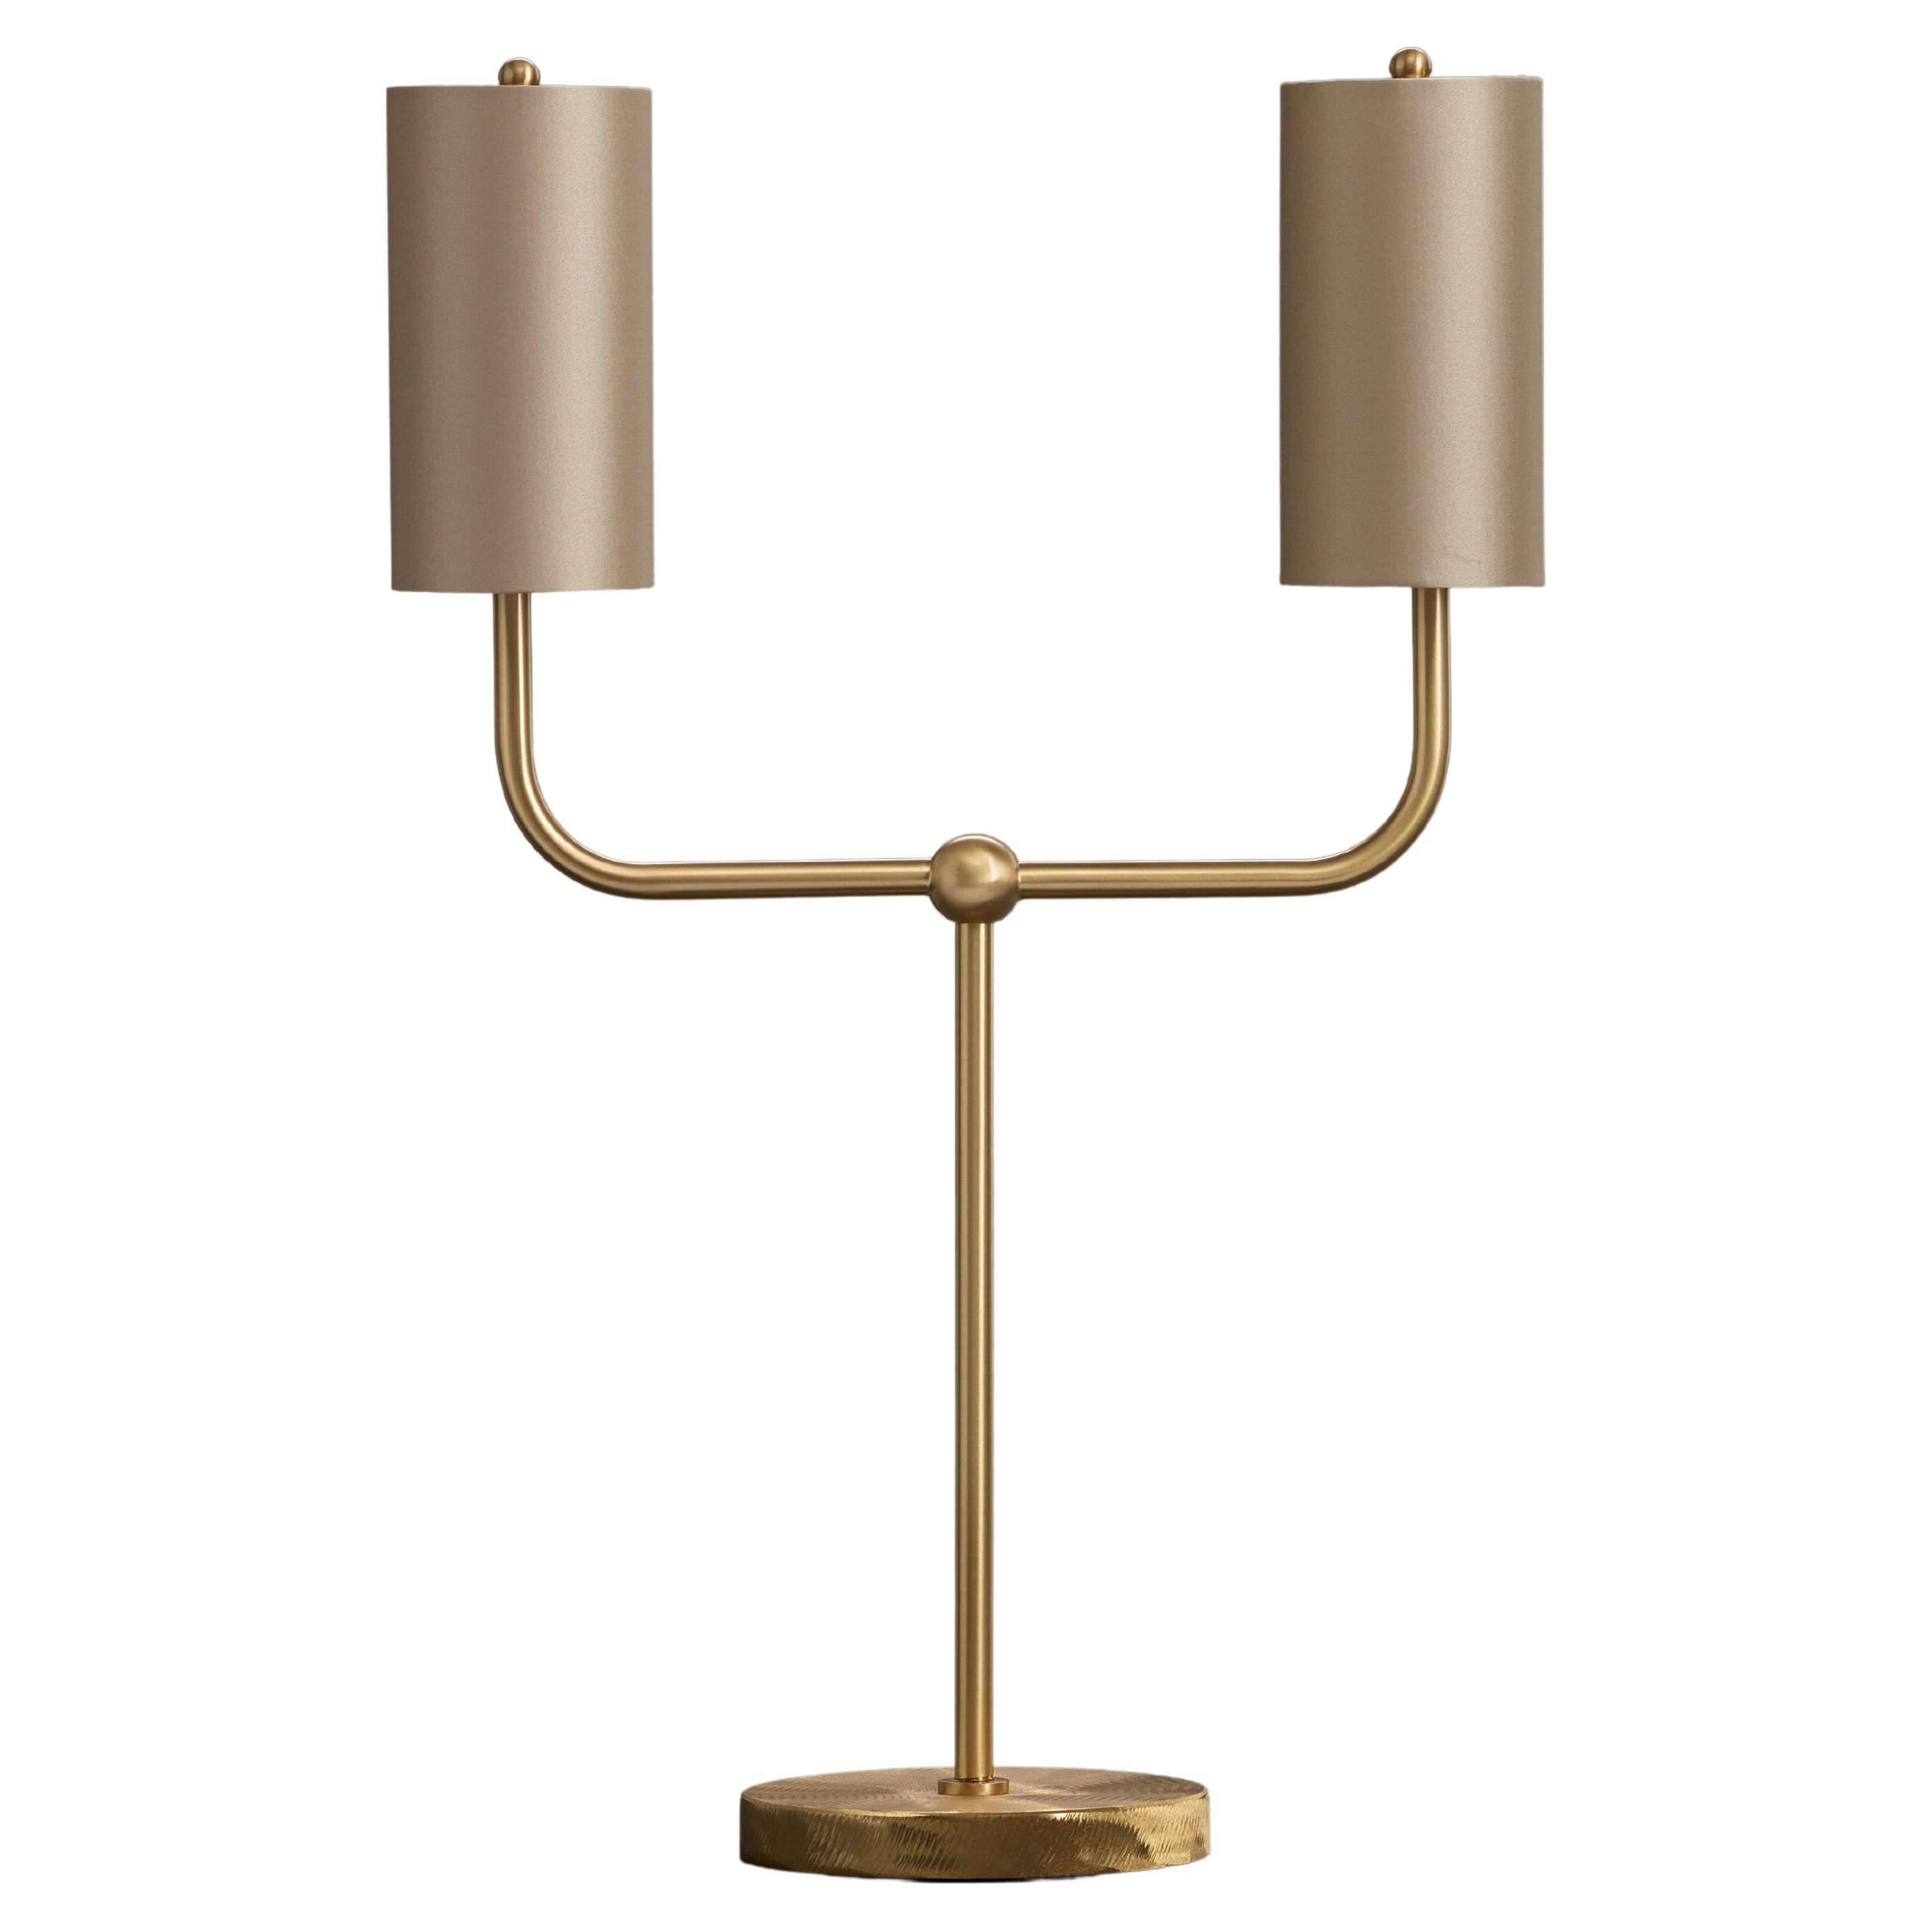 Imagin Classic Table Lamp in Brushed Brass and Fabric Shade For Sale